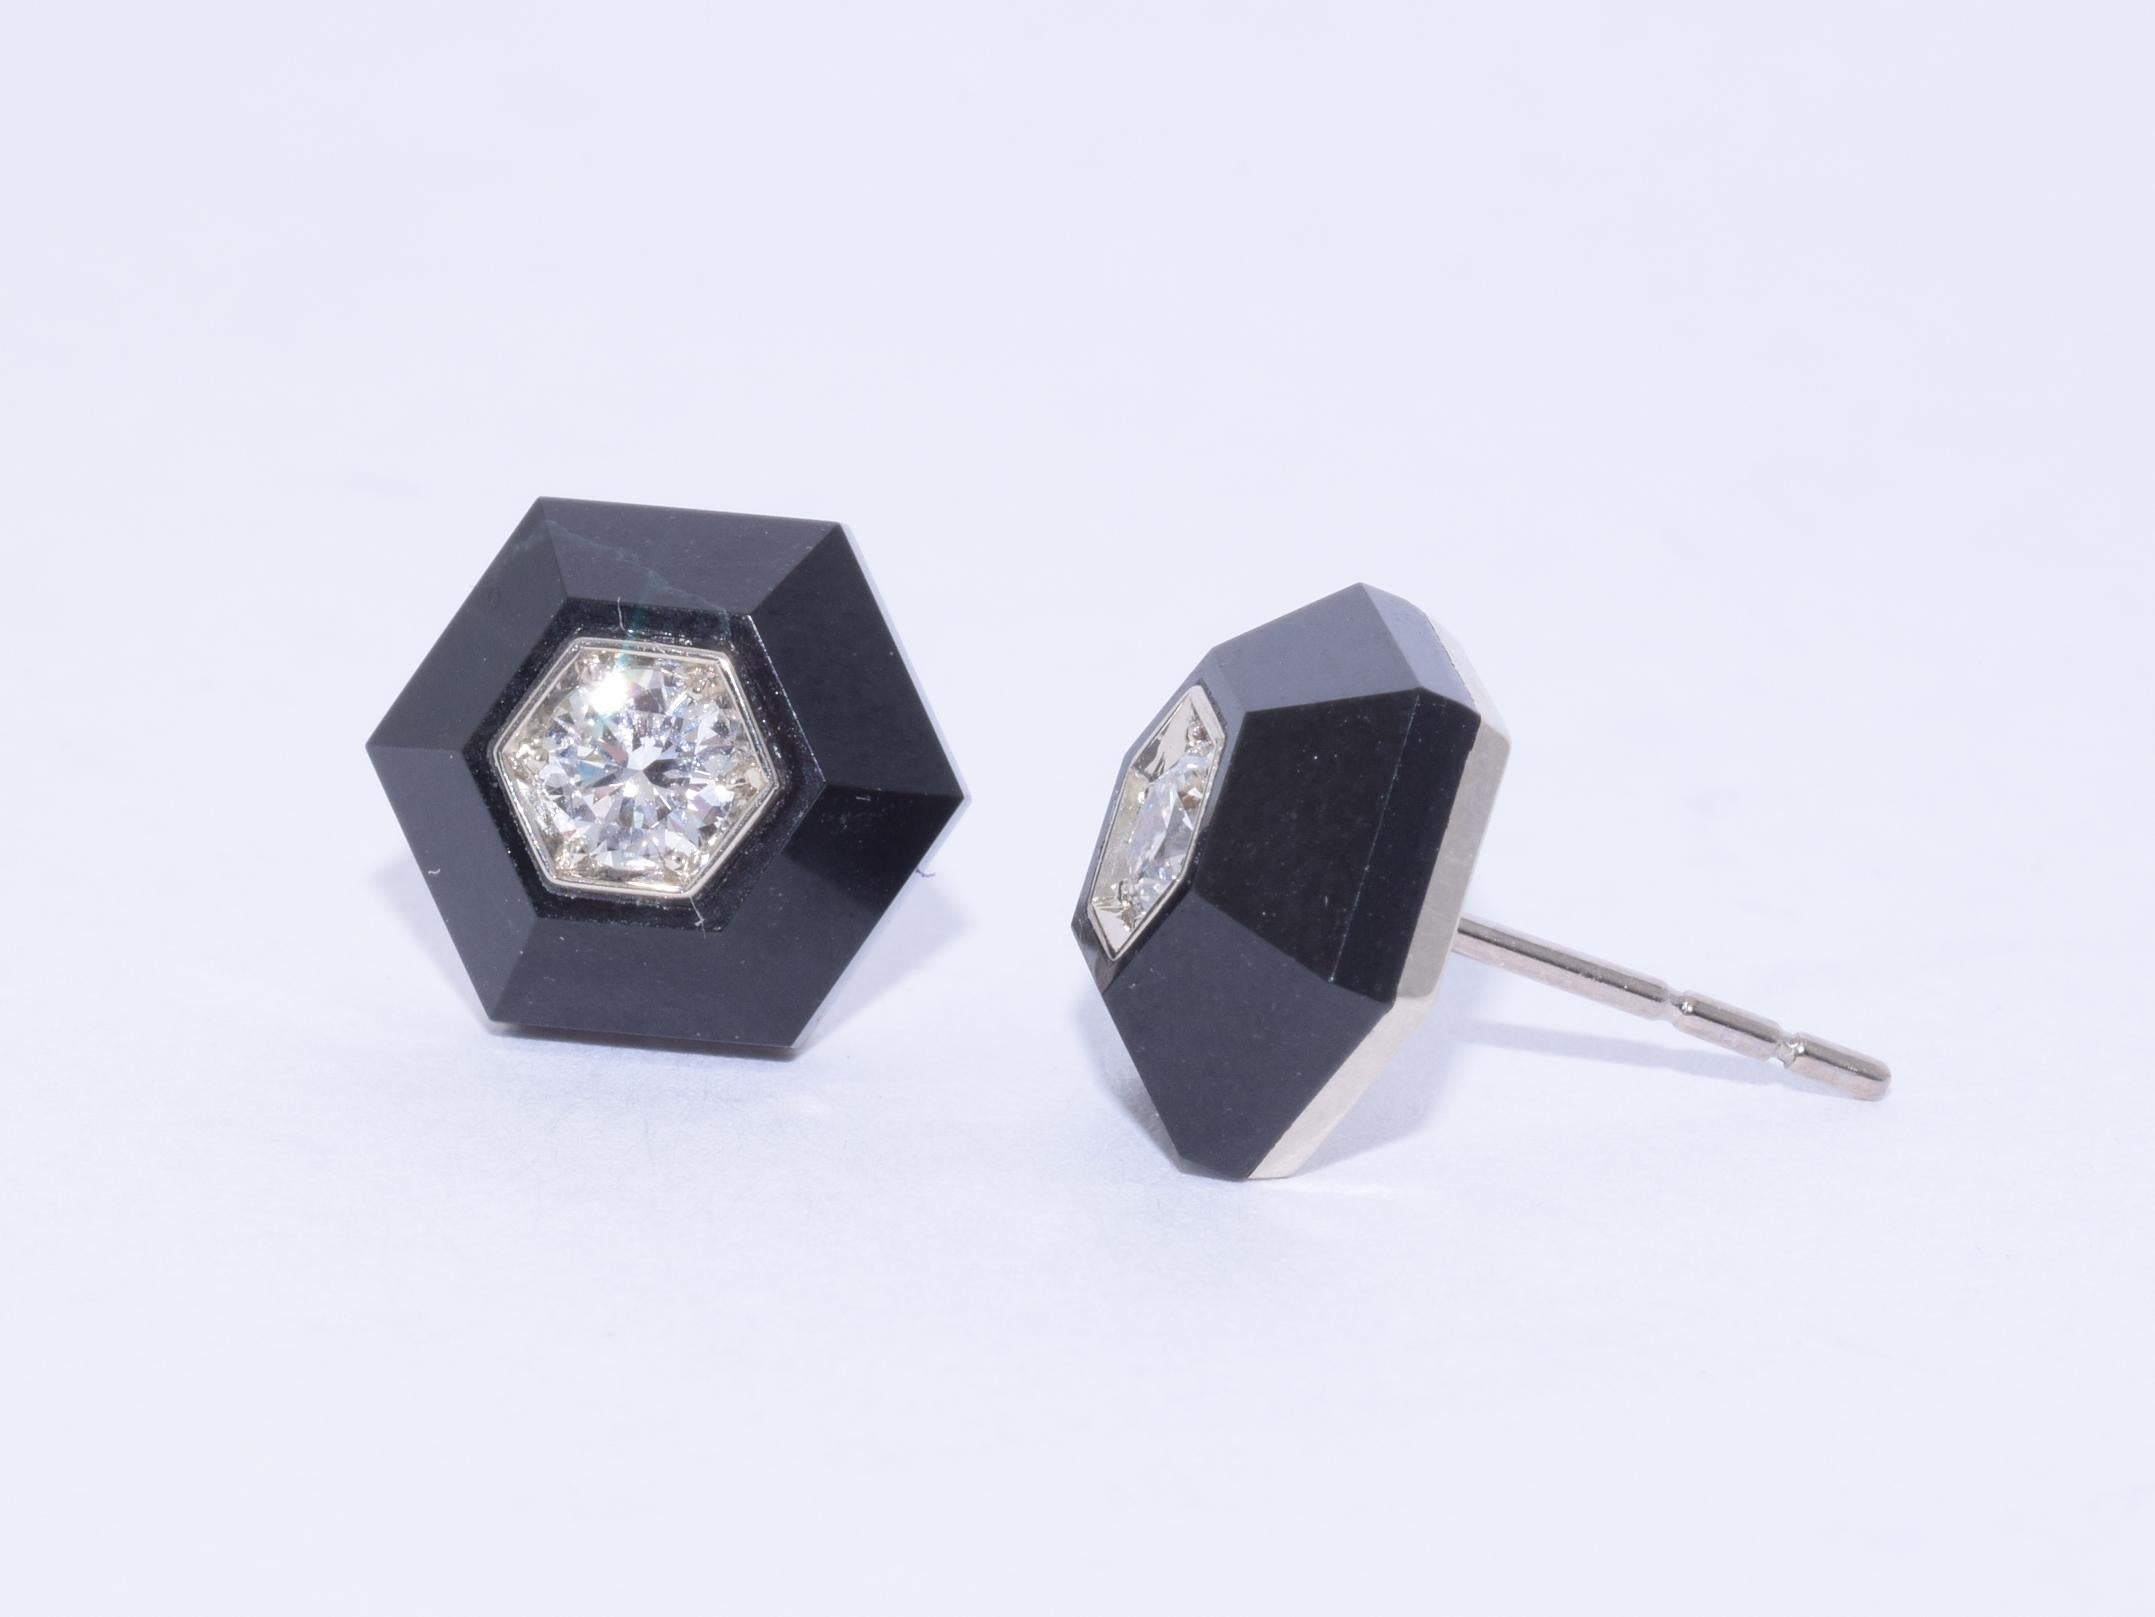 A pair of round diamonds totaling approximately 0.36 carats are inset to black jade hexagons mounted in 18 karat white gold. Signed Fred Leighton. The earrings measure approximately 11 x 9.6mm. 

Fred Leighton is renowned for extraordinary